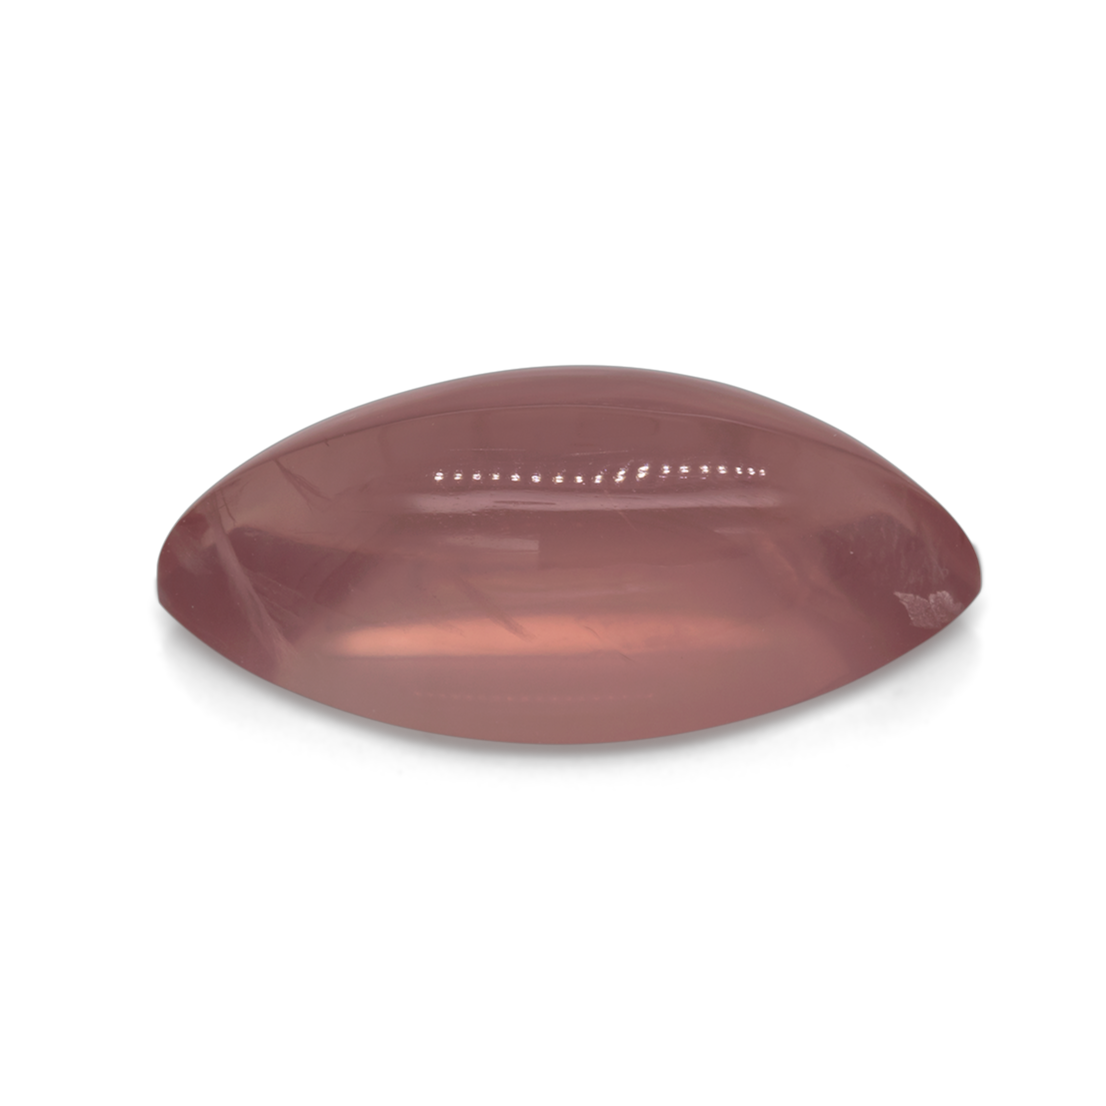 Rose quarz - pink, marquise, 24.9x12.3 mm, 17.28 cts, No. RO00007